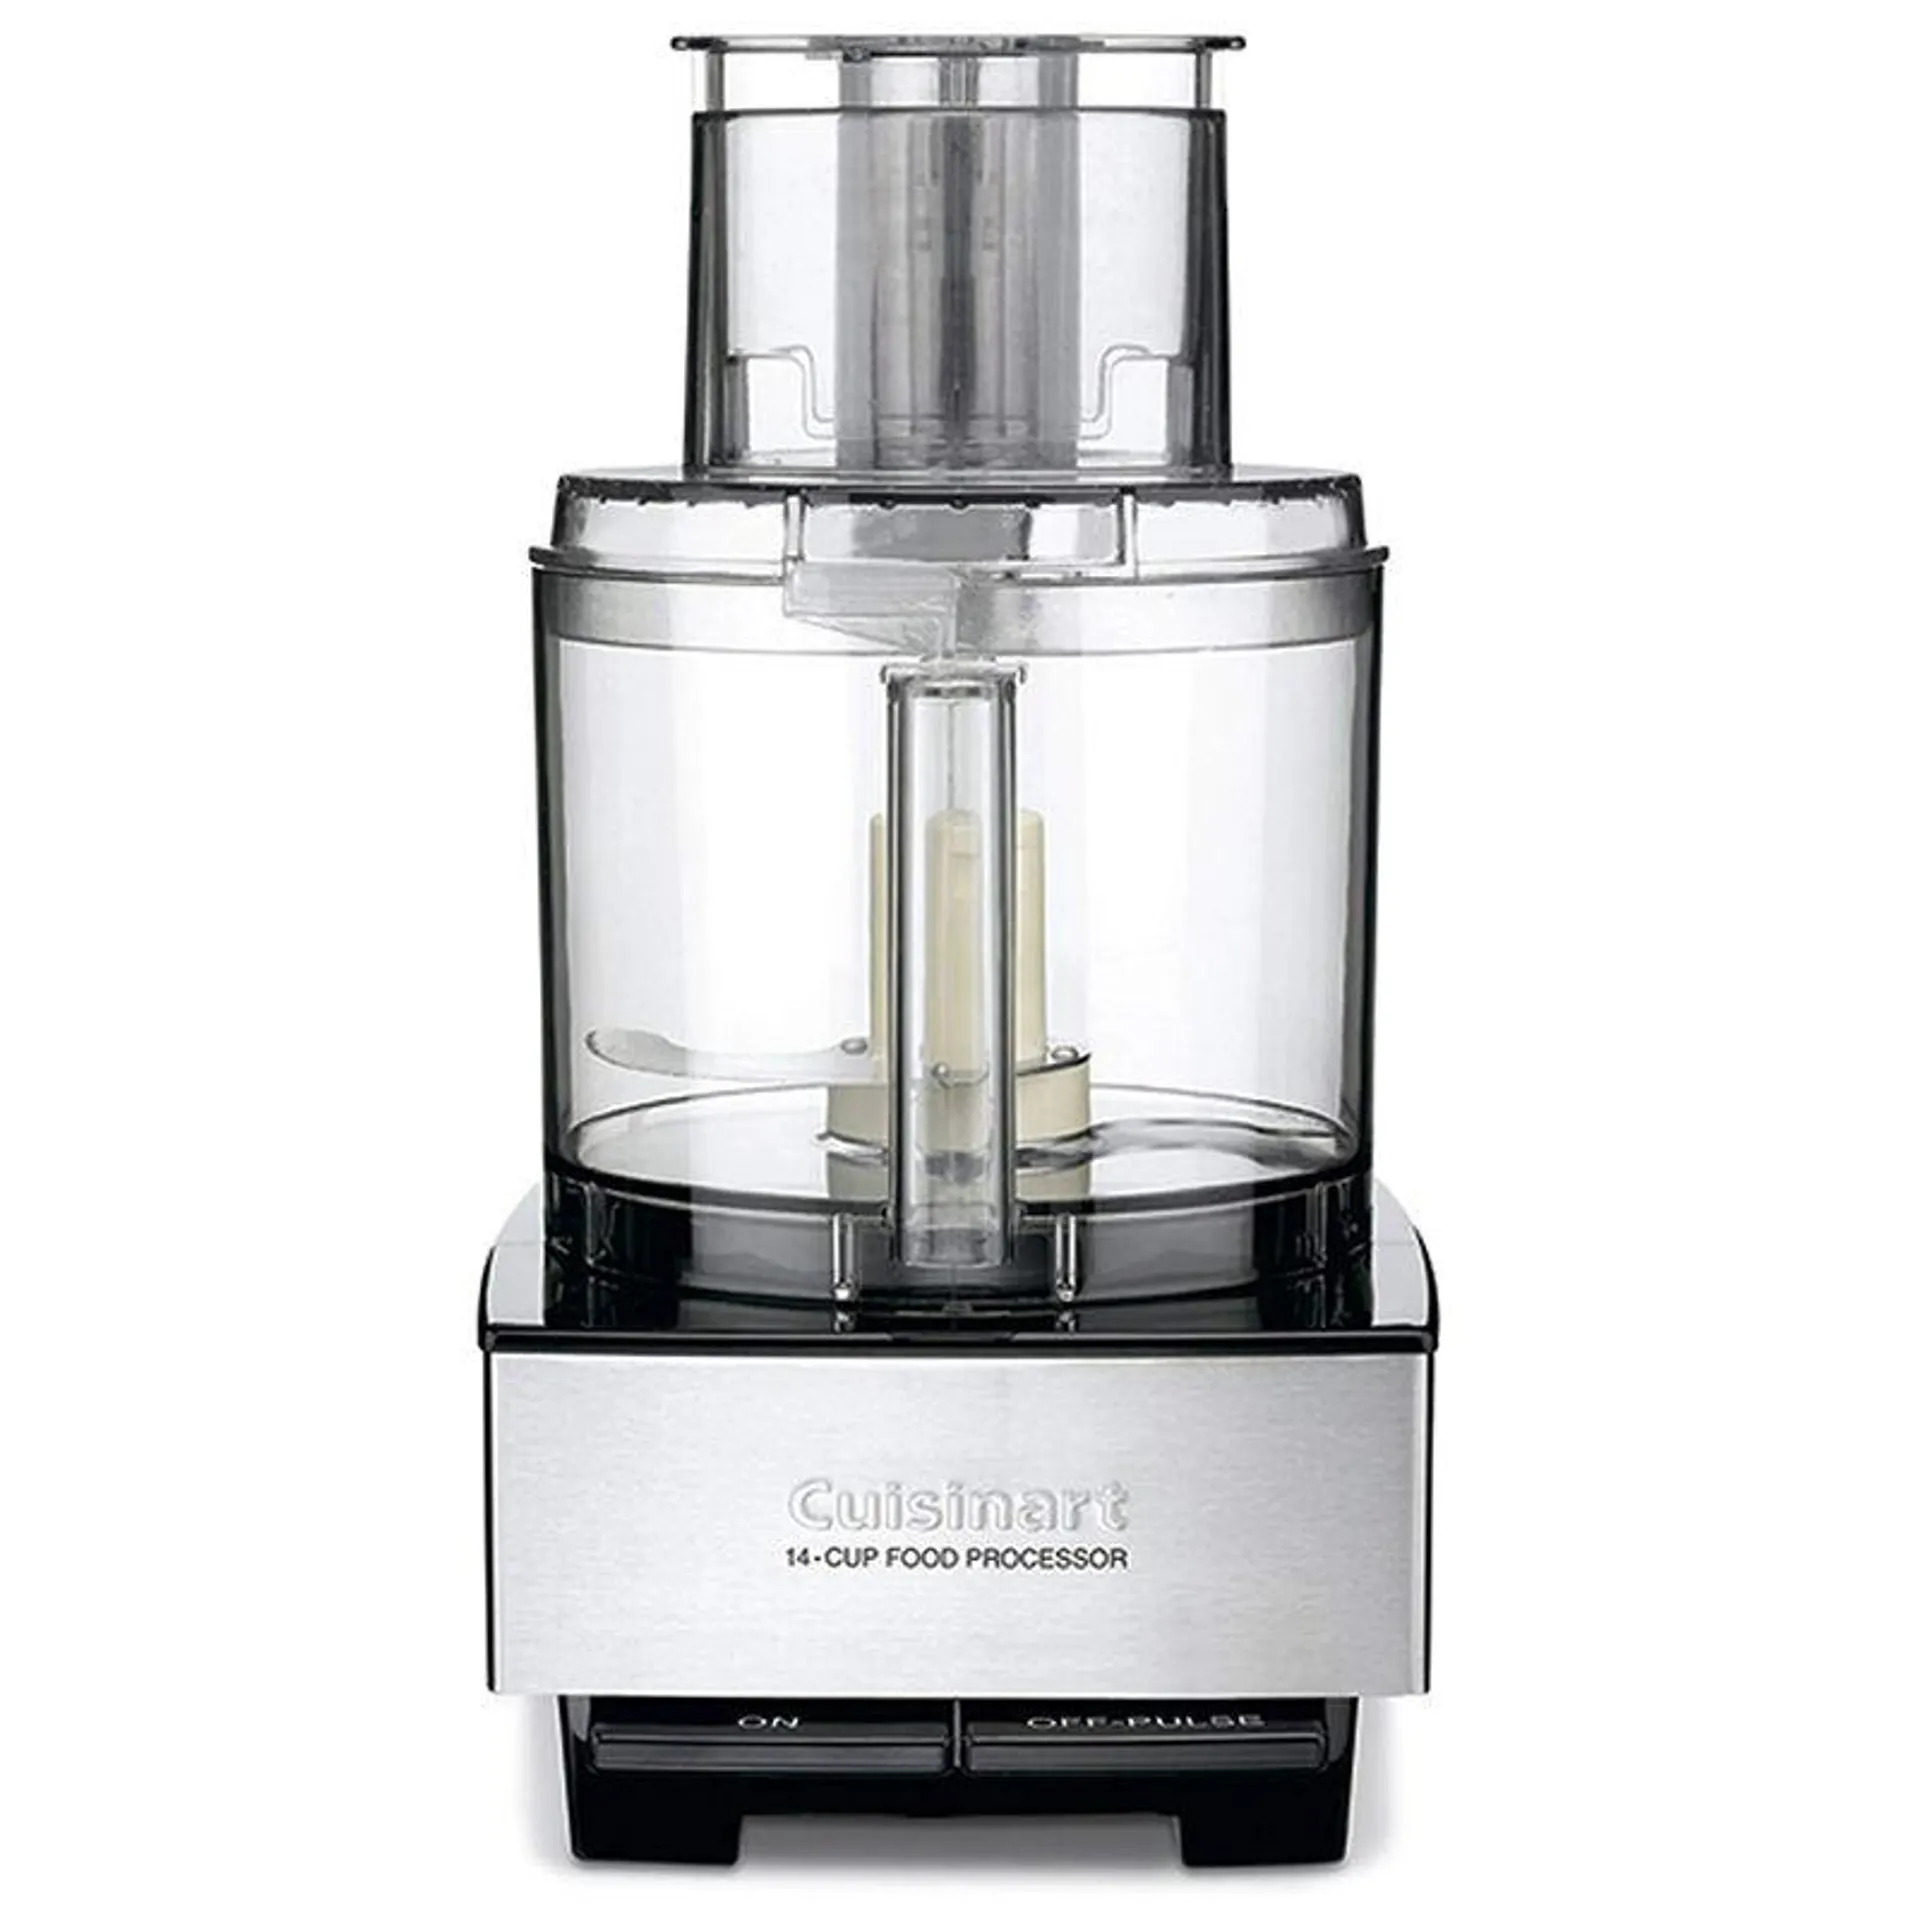 Cuisinart Custom 14 Cup Food Processor - Brushed Stainless Steel